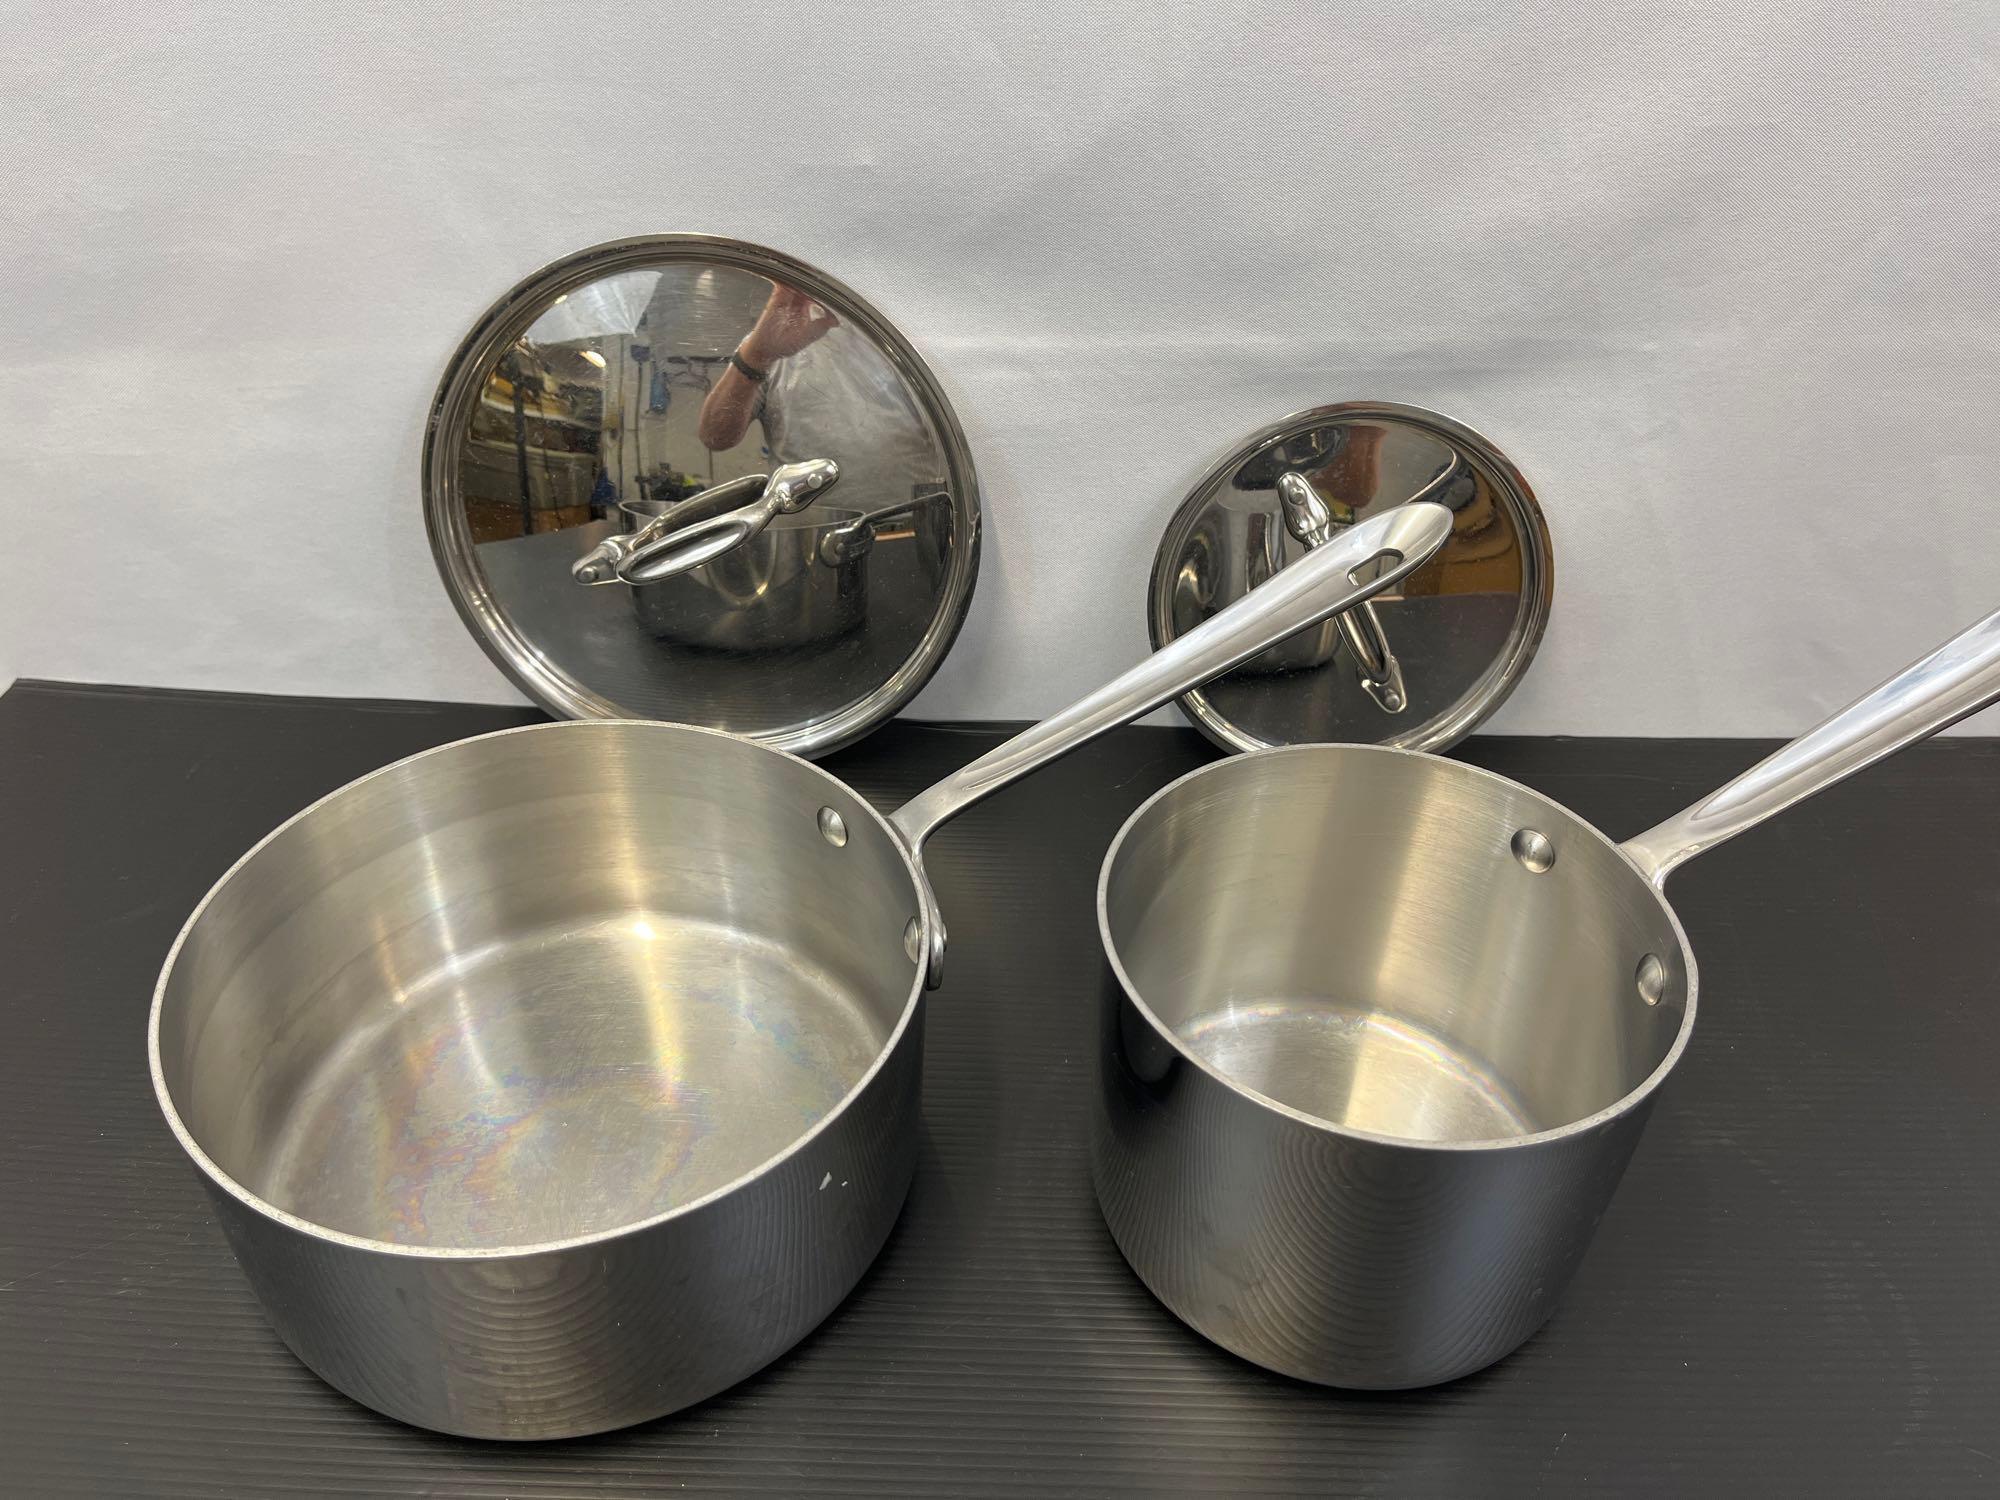 8 Piece Stainless Steel Cookware Set- 4 Pans with Lids